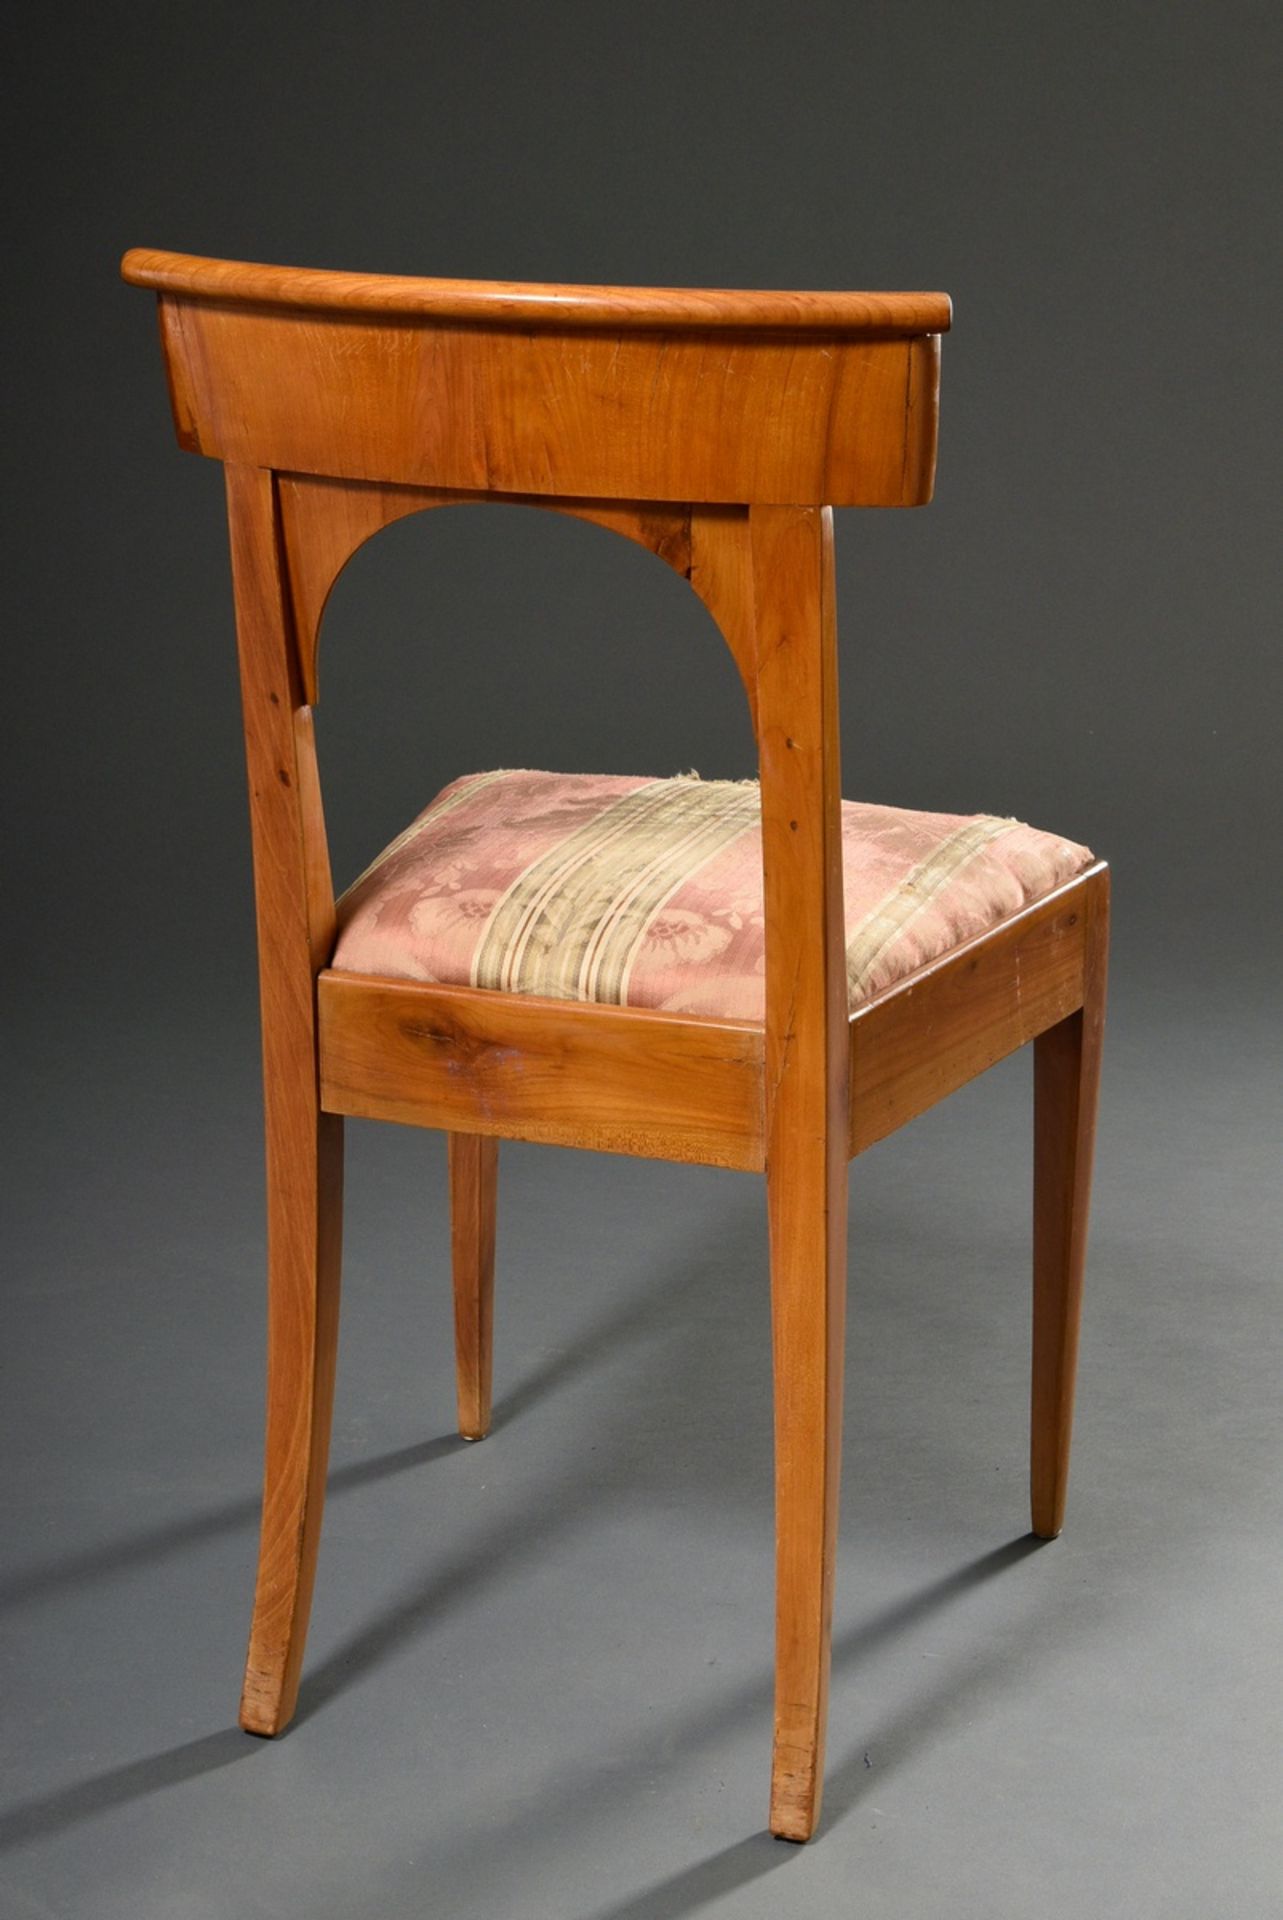 4 plain Biedermeier chairs with shovel backrest and arched element in the back, cherry veneer, 1st  - Image 7 of 8